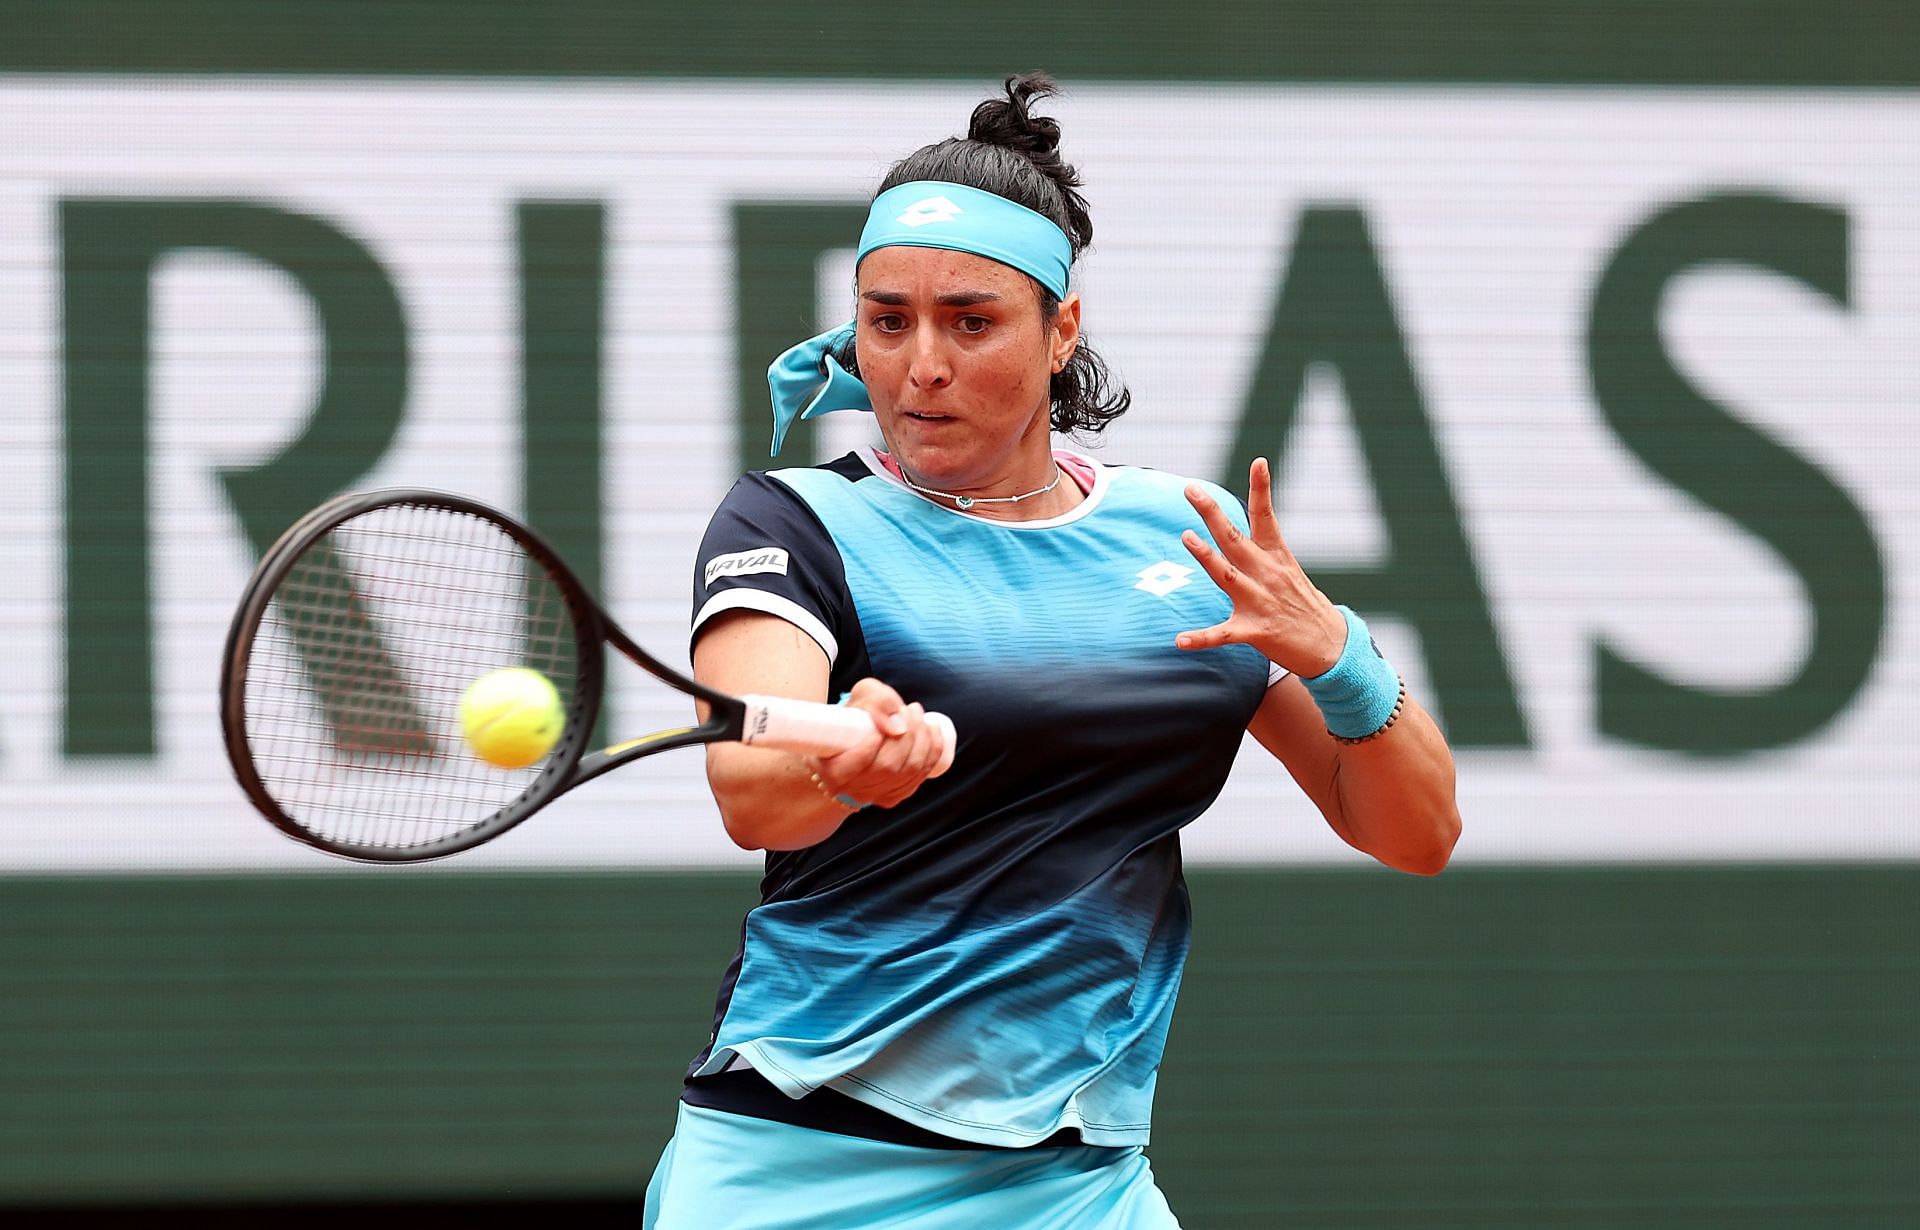 Ons Jabeur could not recreate her clay season form at Roland Garros